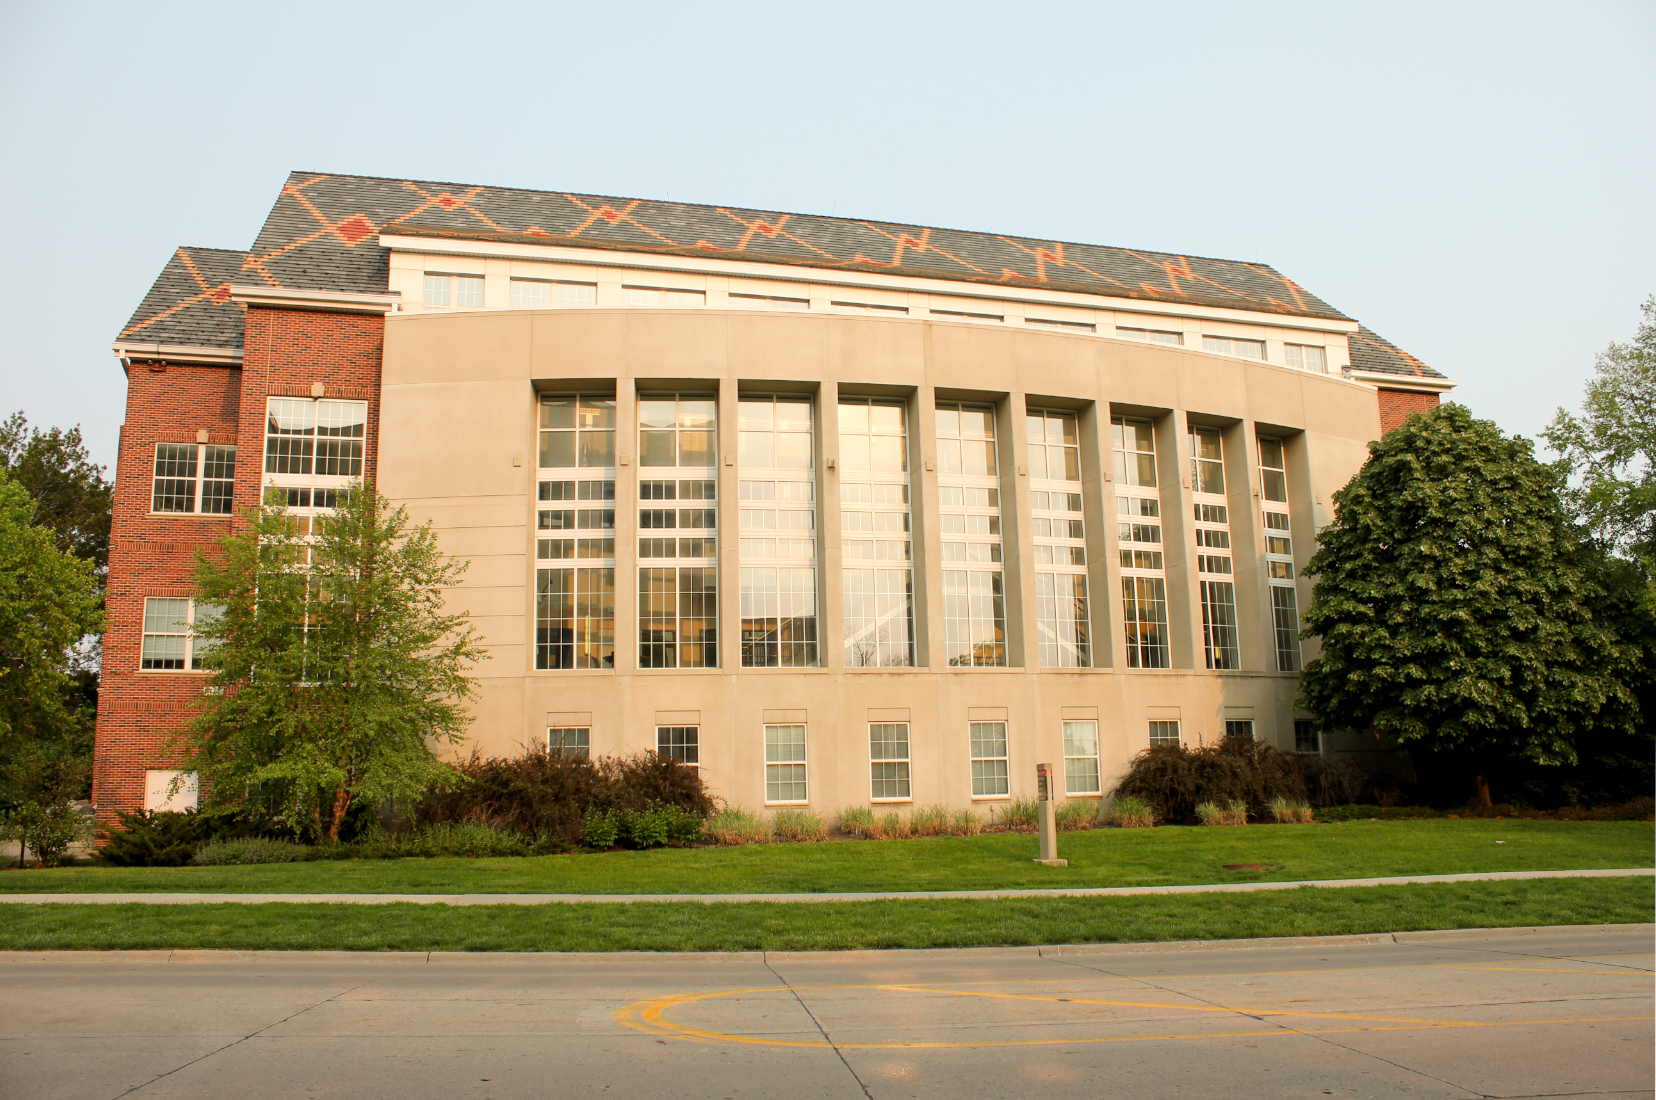 Photo of the front of the Hixon-Lied building in which the Student Accessibility Office is housed